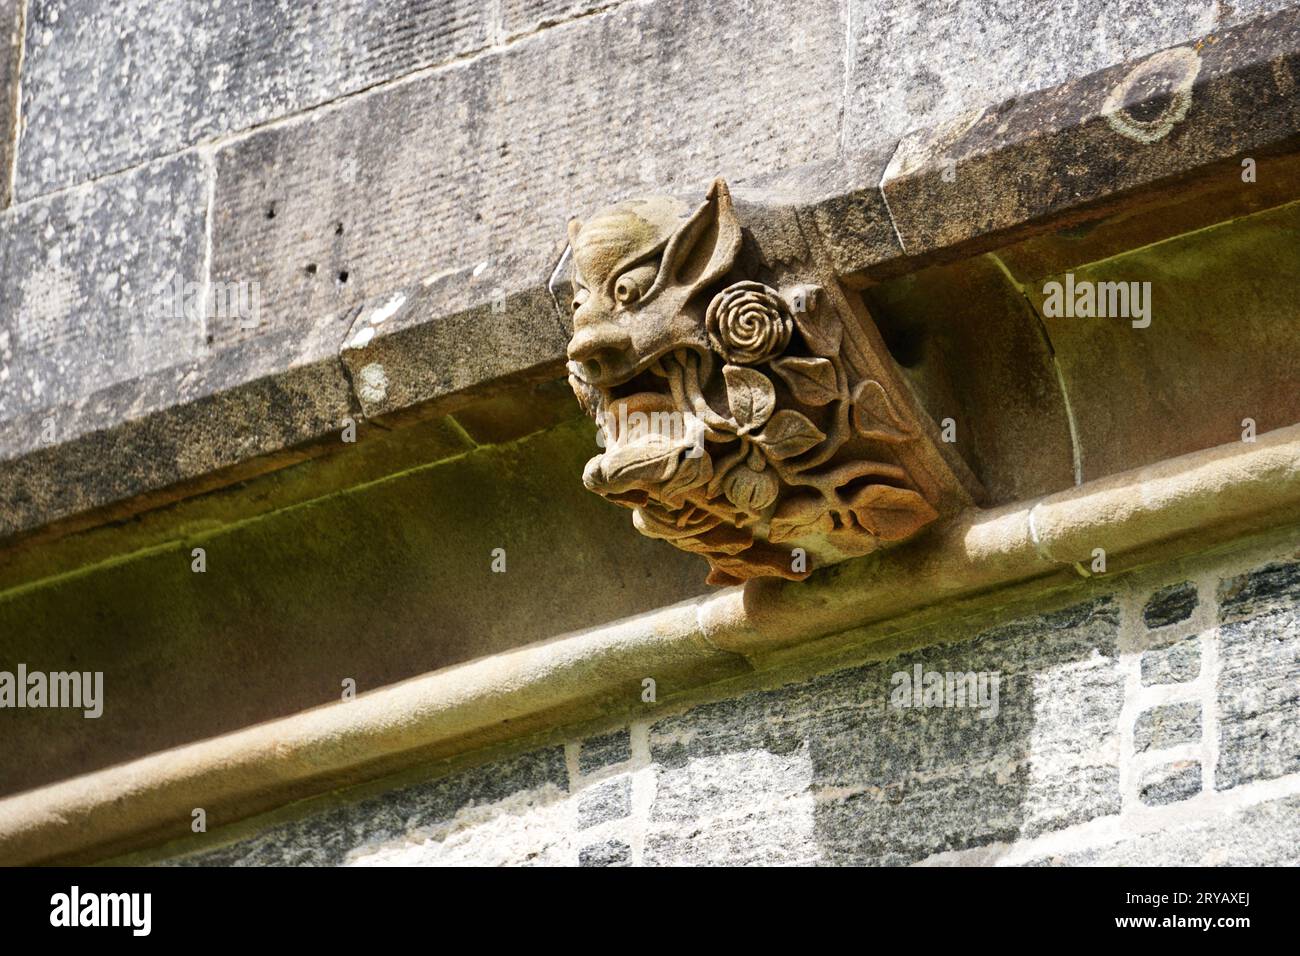 Angle view of carved stone gargoyle at Lews Castle, Stornoway, Lewis Island. Surrounded by roses and vines, its scary face shows fangs and wild eyes Stock Photo